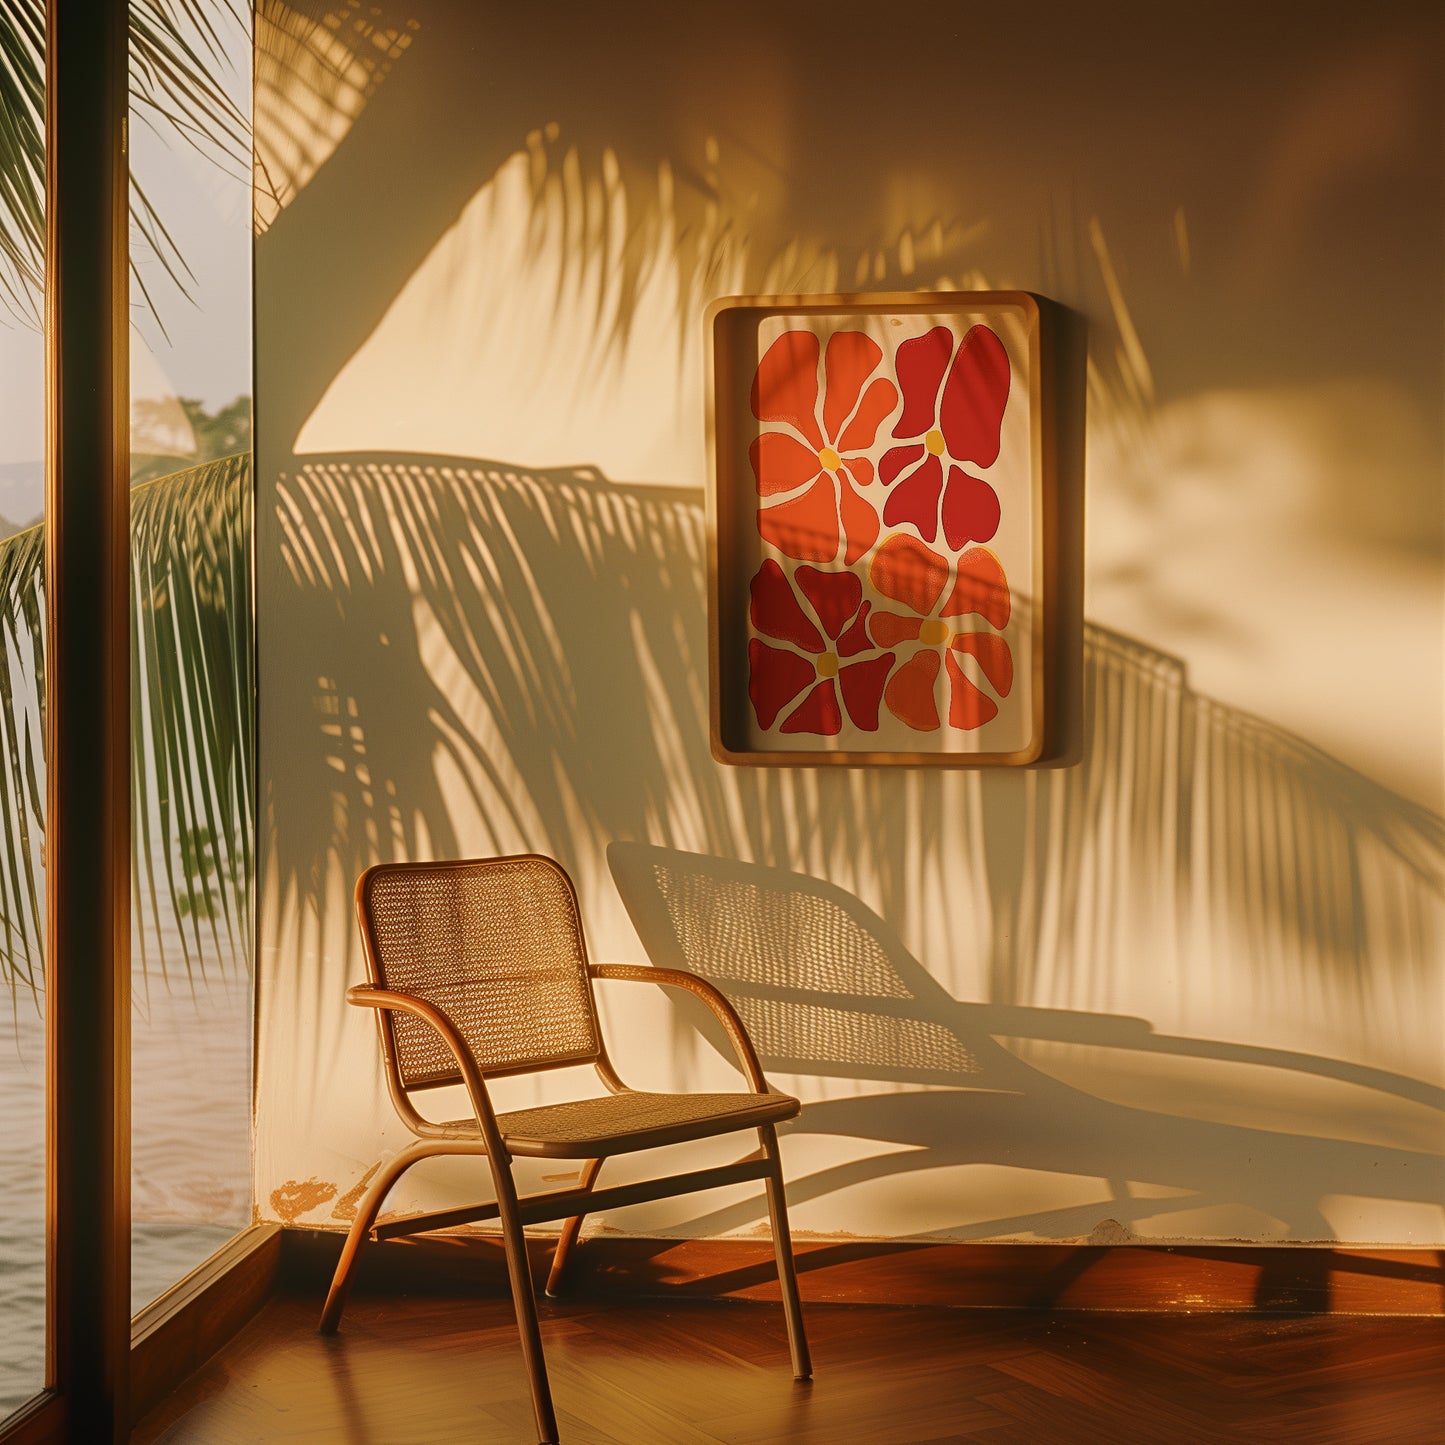 A warm, sunlit room with a chair and shadow of palm leaves on the wall.